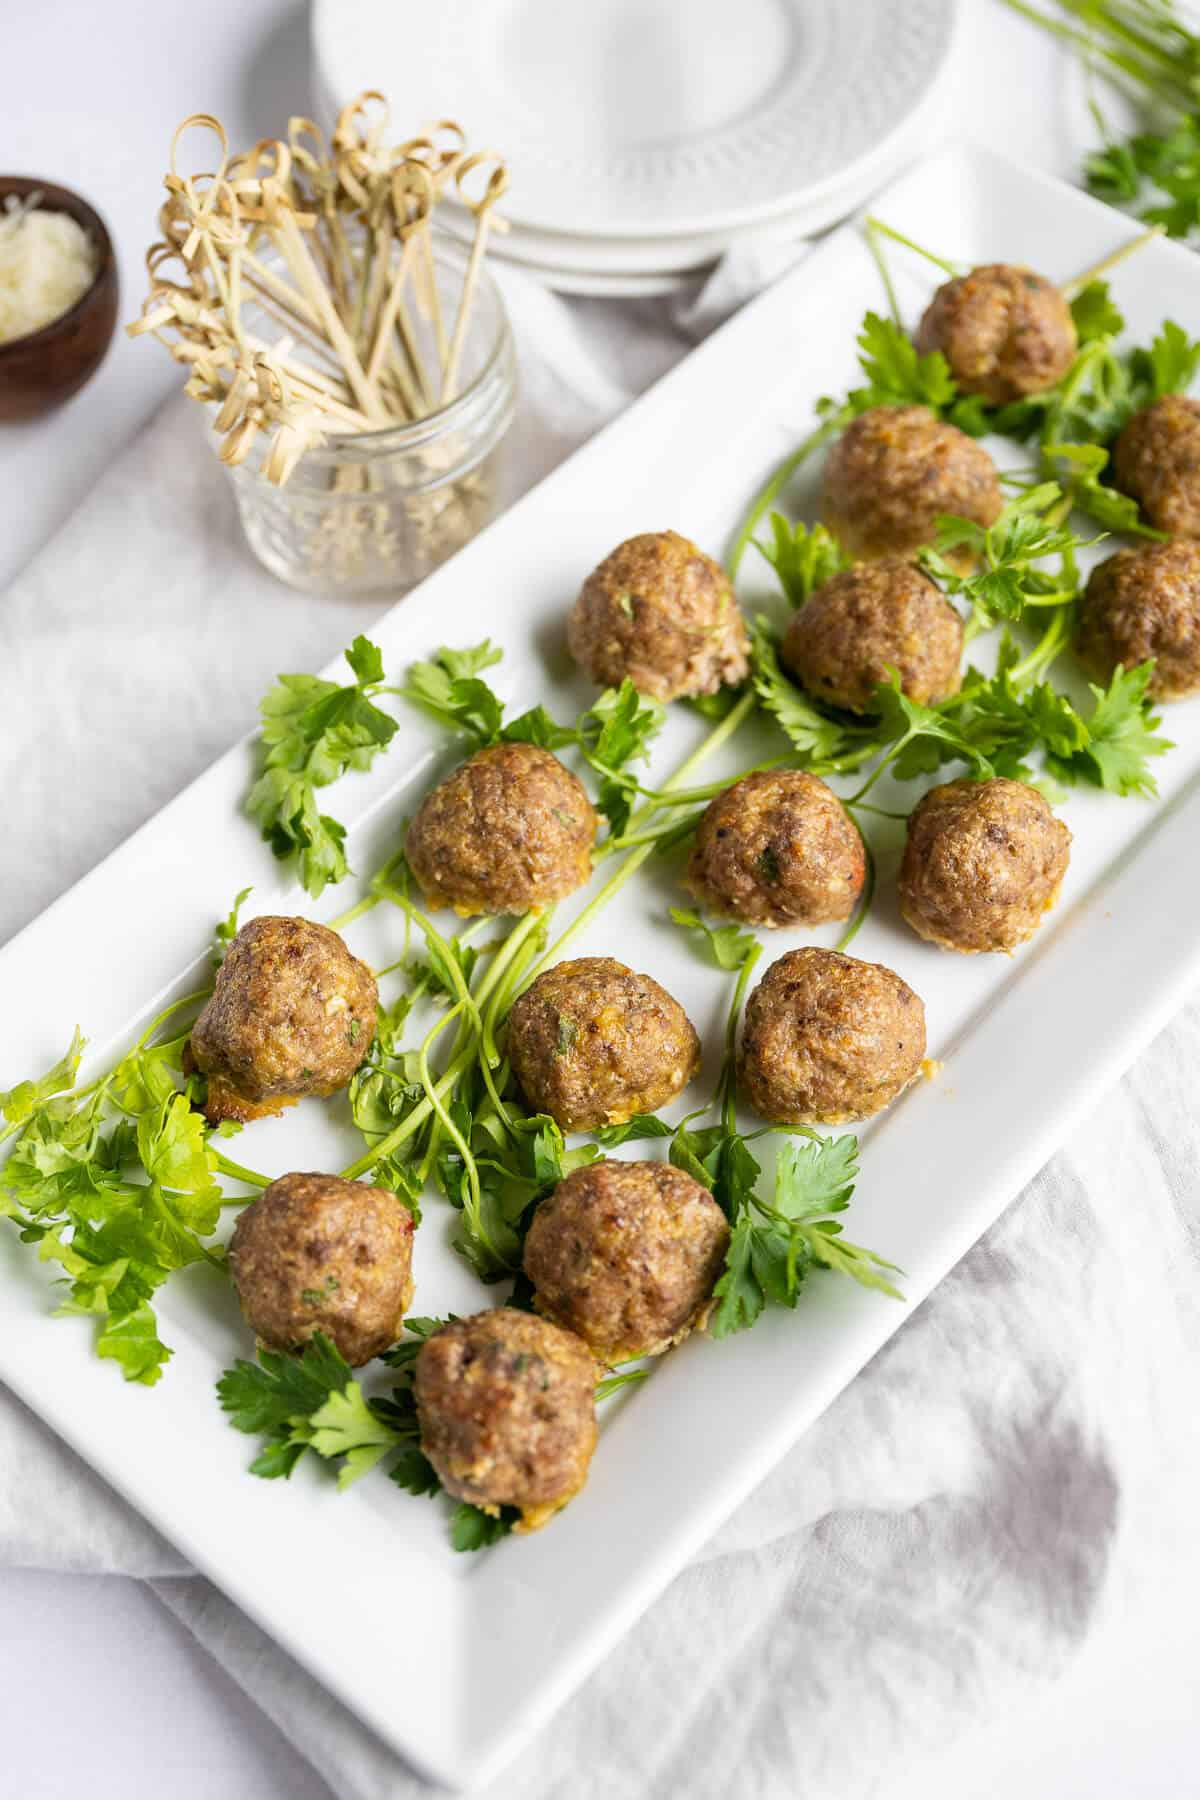 Oven baked seasoned meatballs without sauce on a platter garnished with fresh parsley.